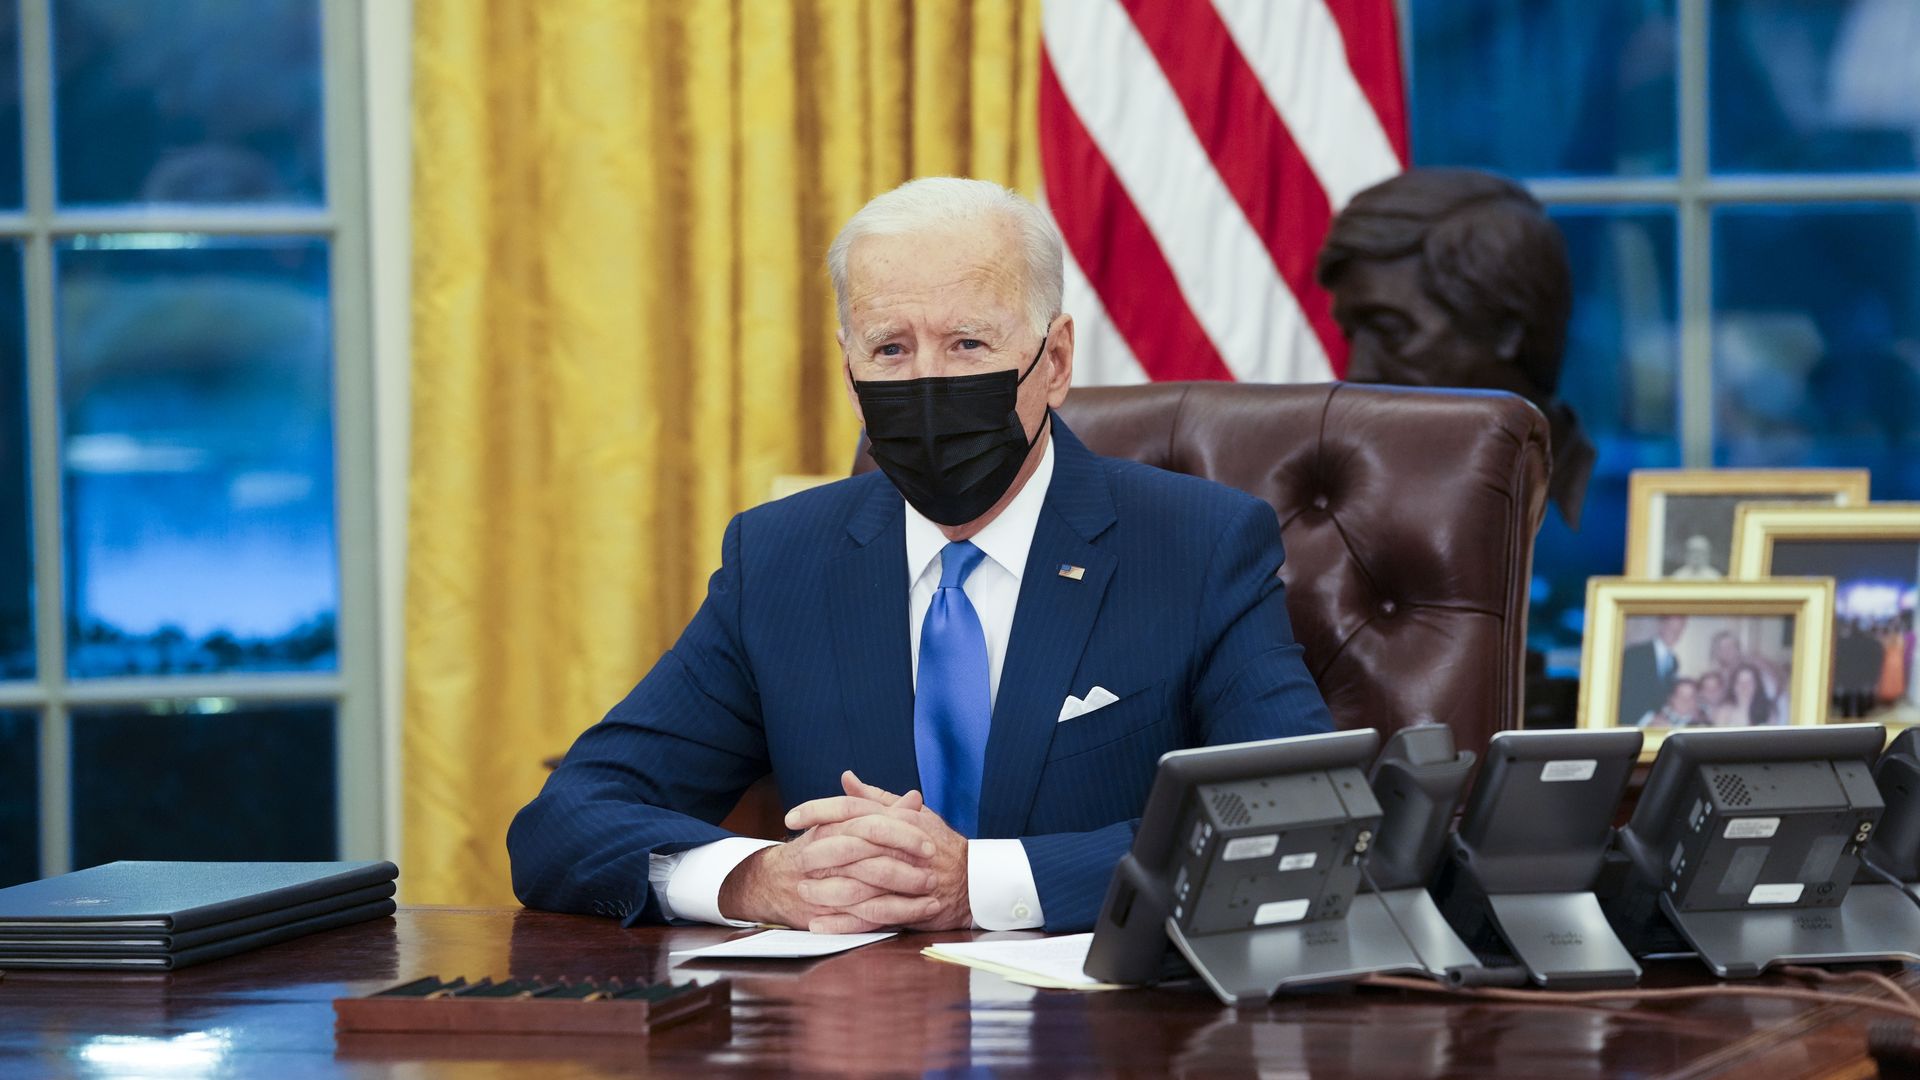 Picture of Joe Biden sitting on his desk in the Oval Office